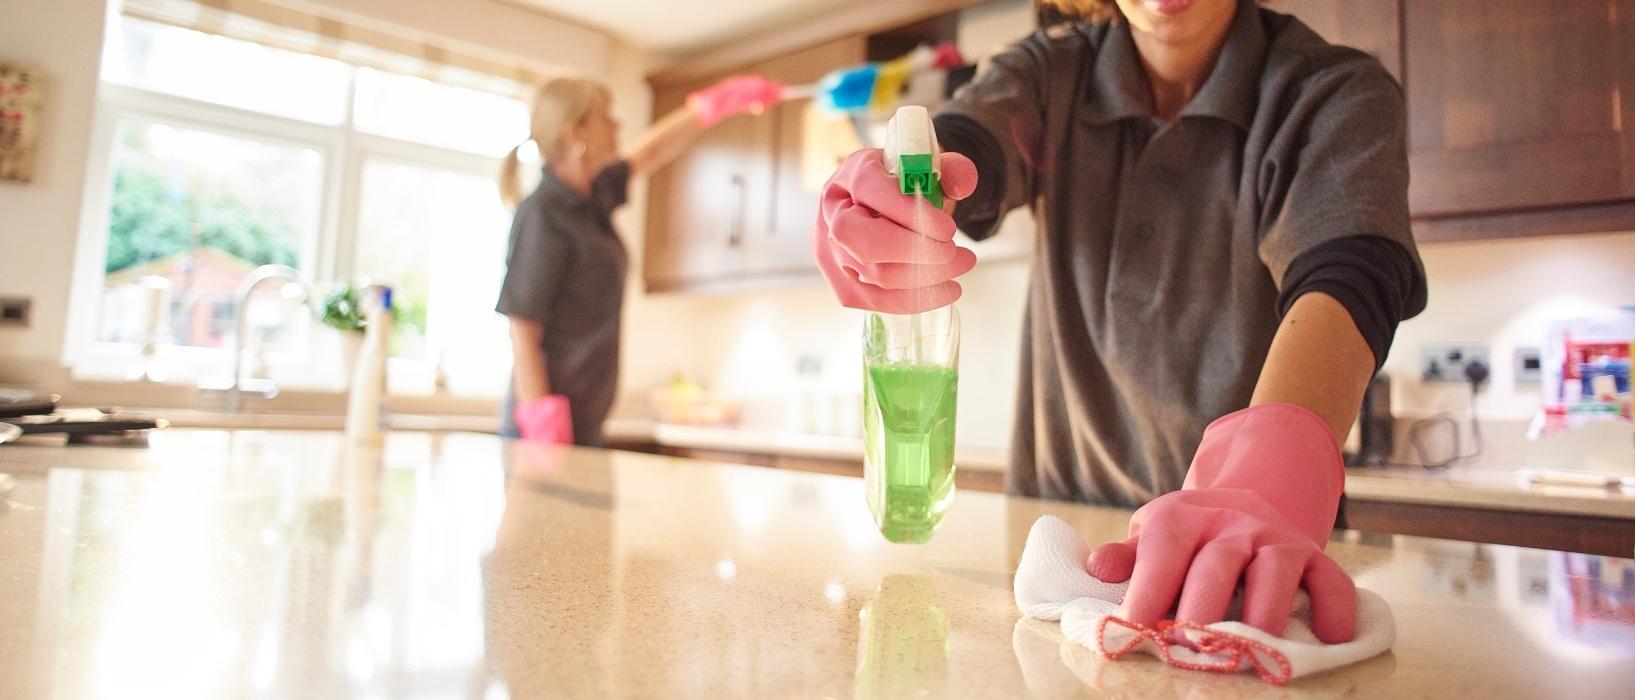 close up of woman's gloved hand and spray bottle cleaning kitchen counter, another woman is blurred in the background cleaning an oven